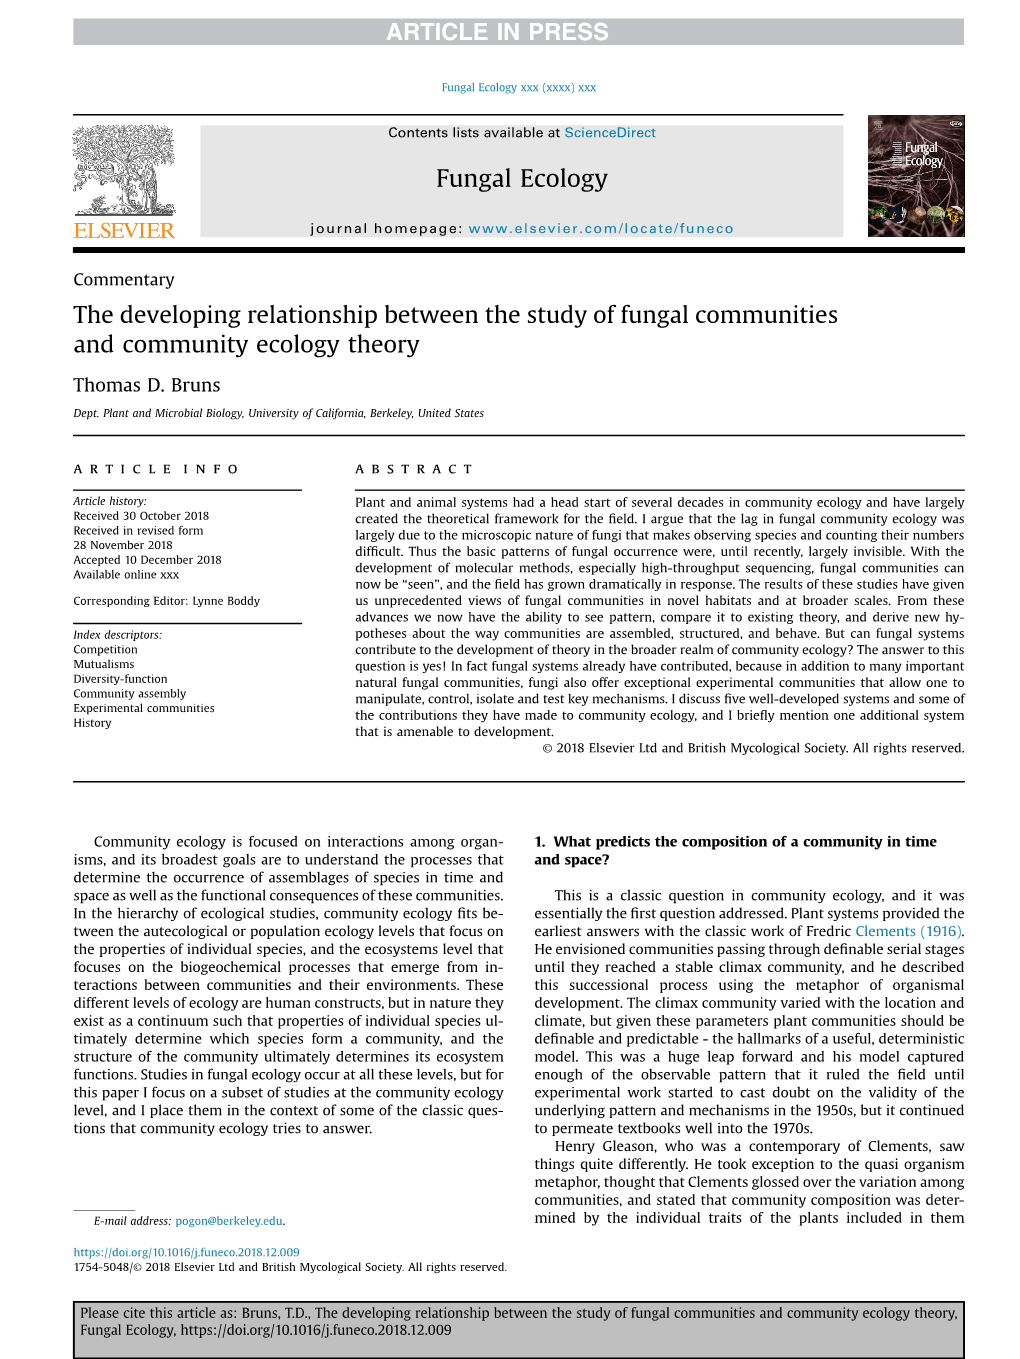 The Developing Relationship Between the Study of Fungal Communities and Community Ecology Theory